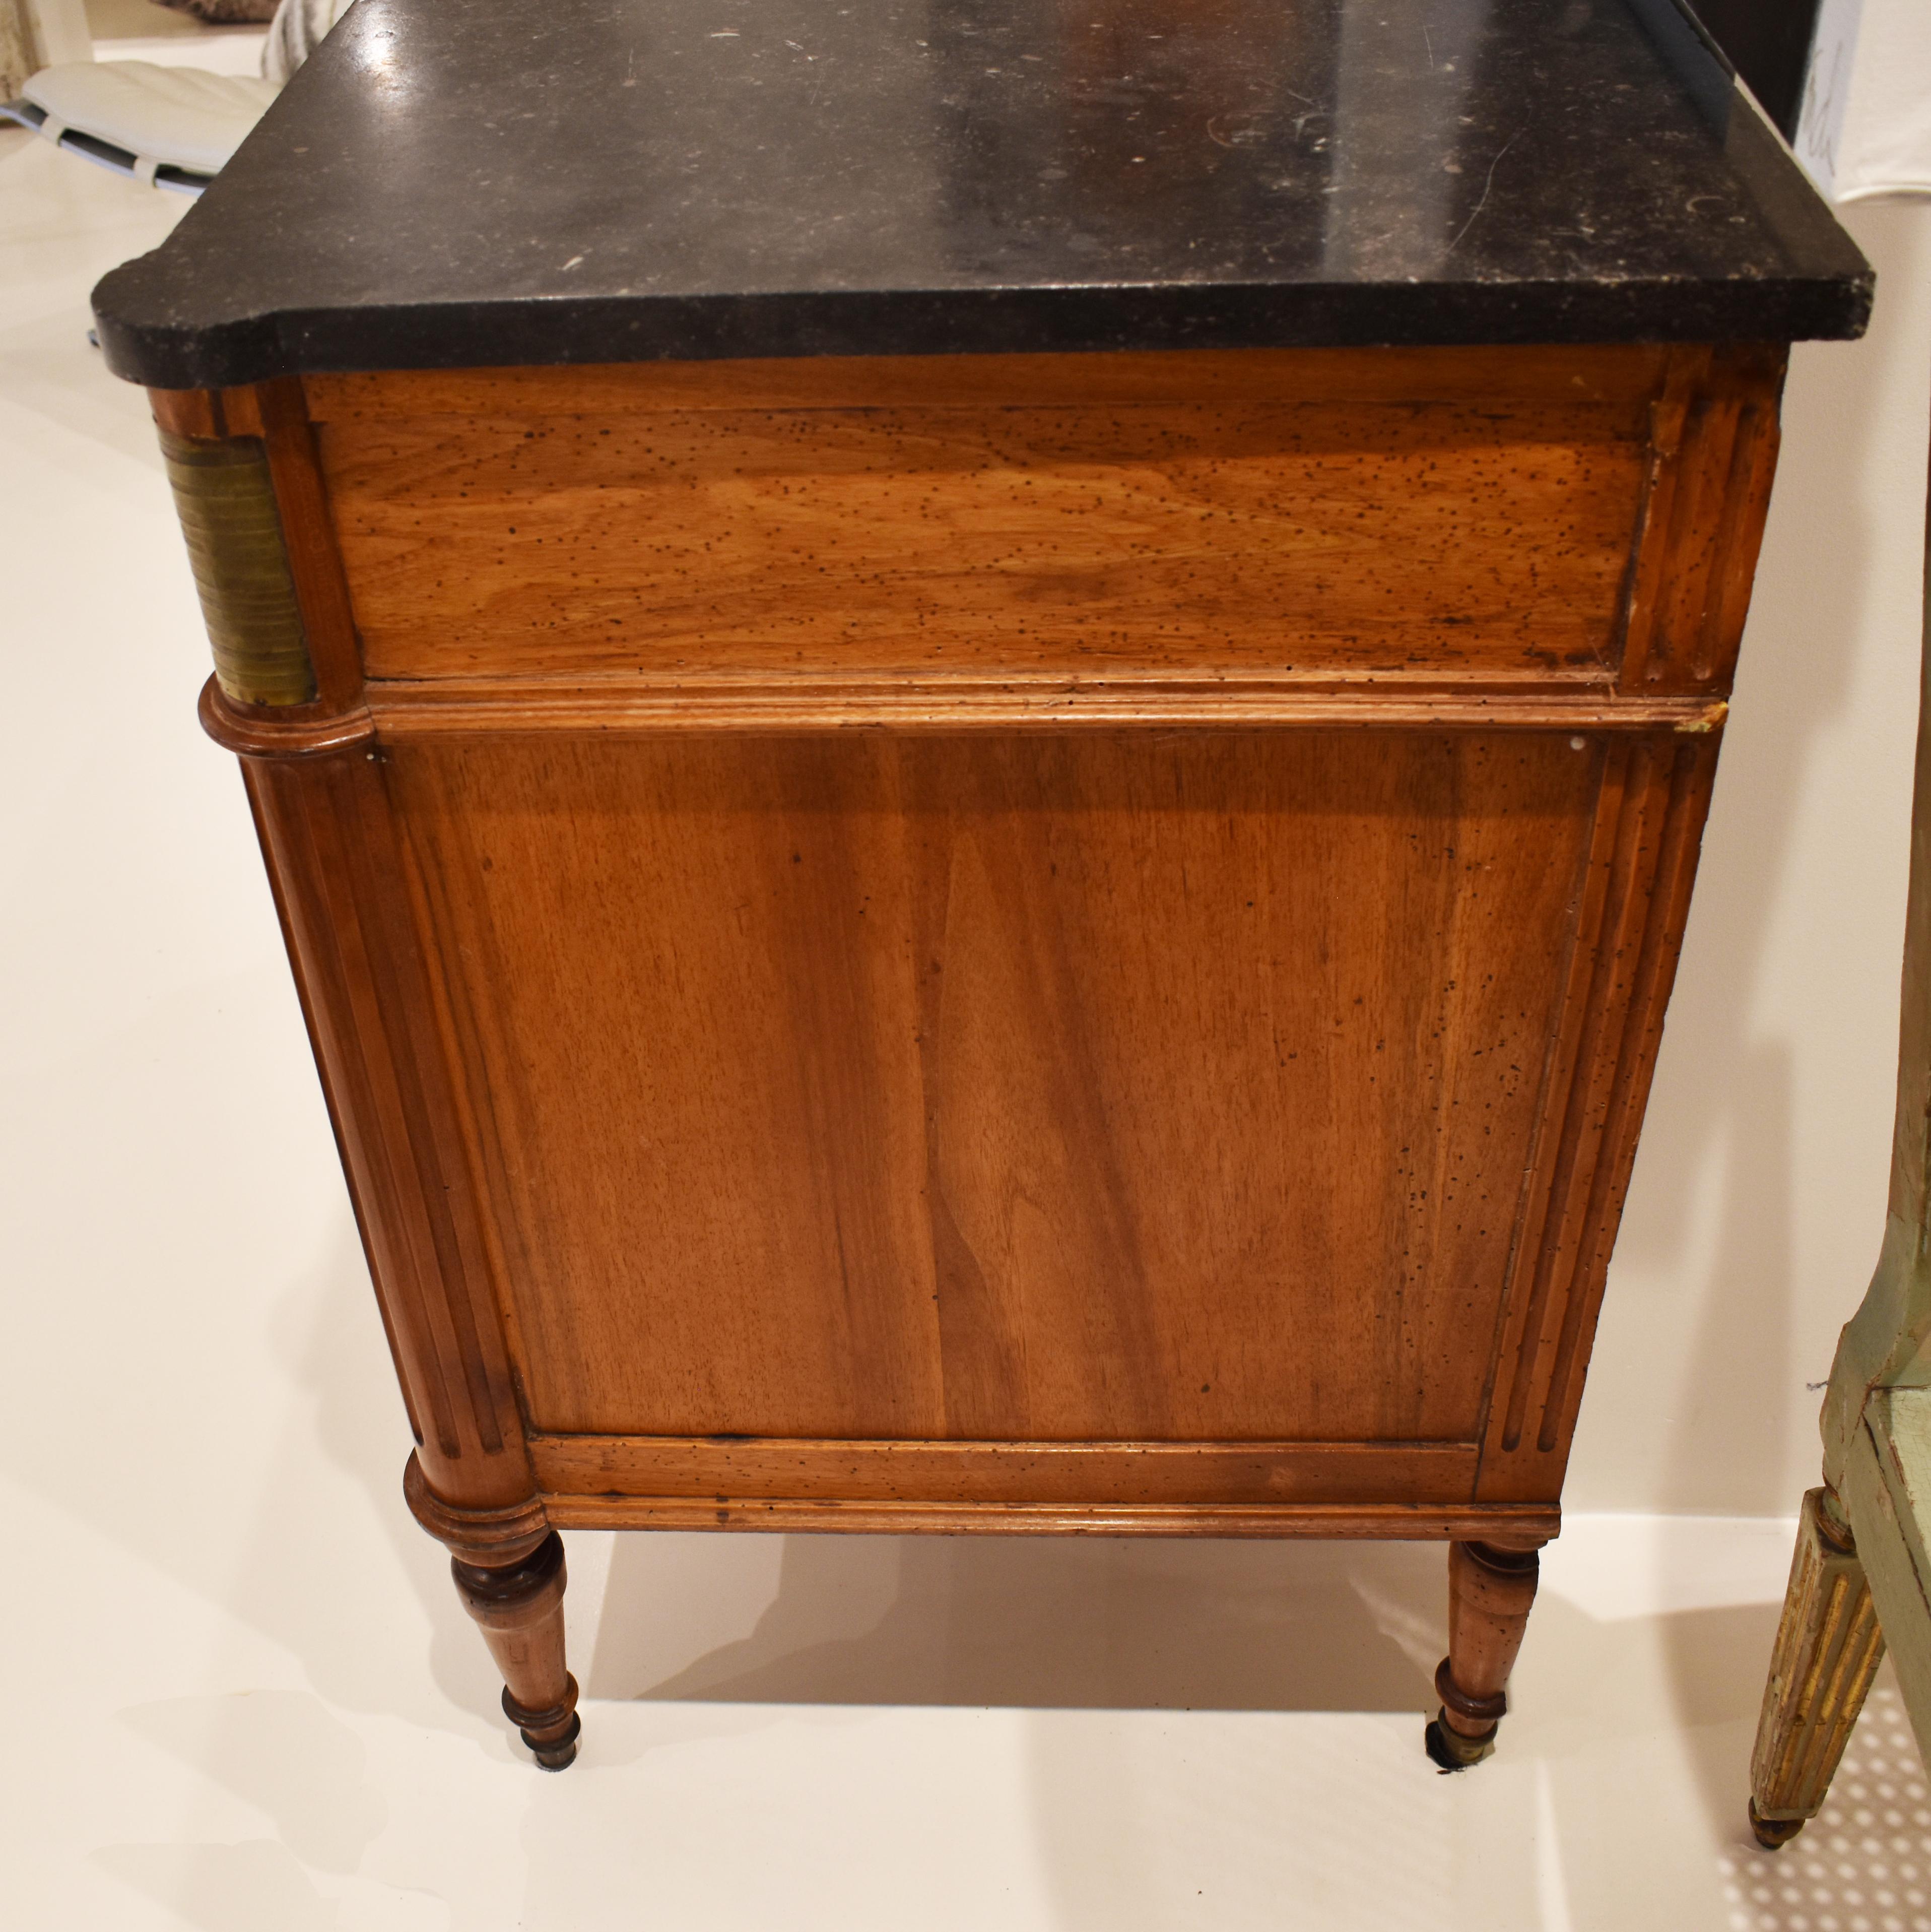 19th Century Walnut Commode with Marble Top, 19c French Louis XVI Style